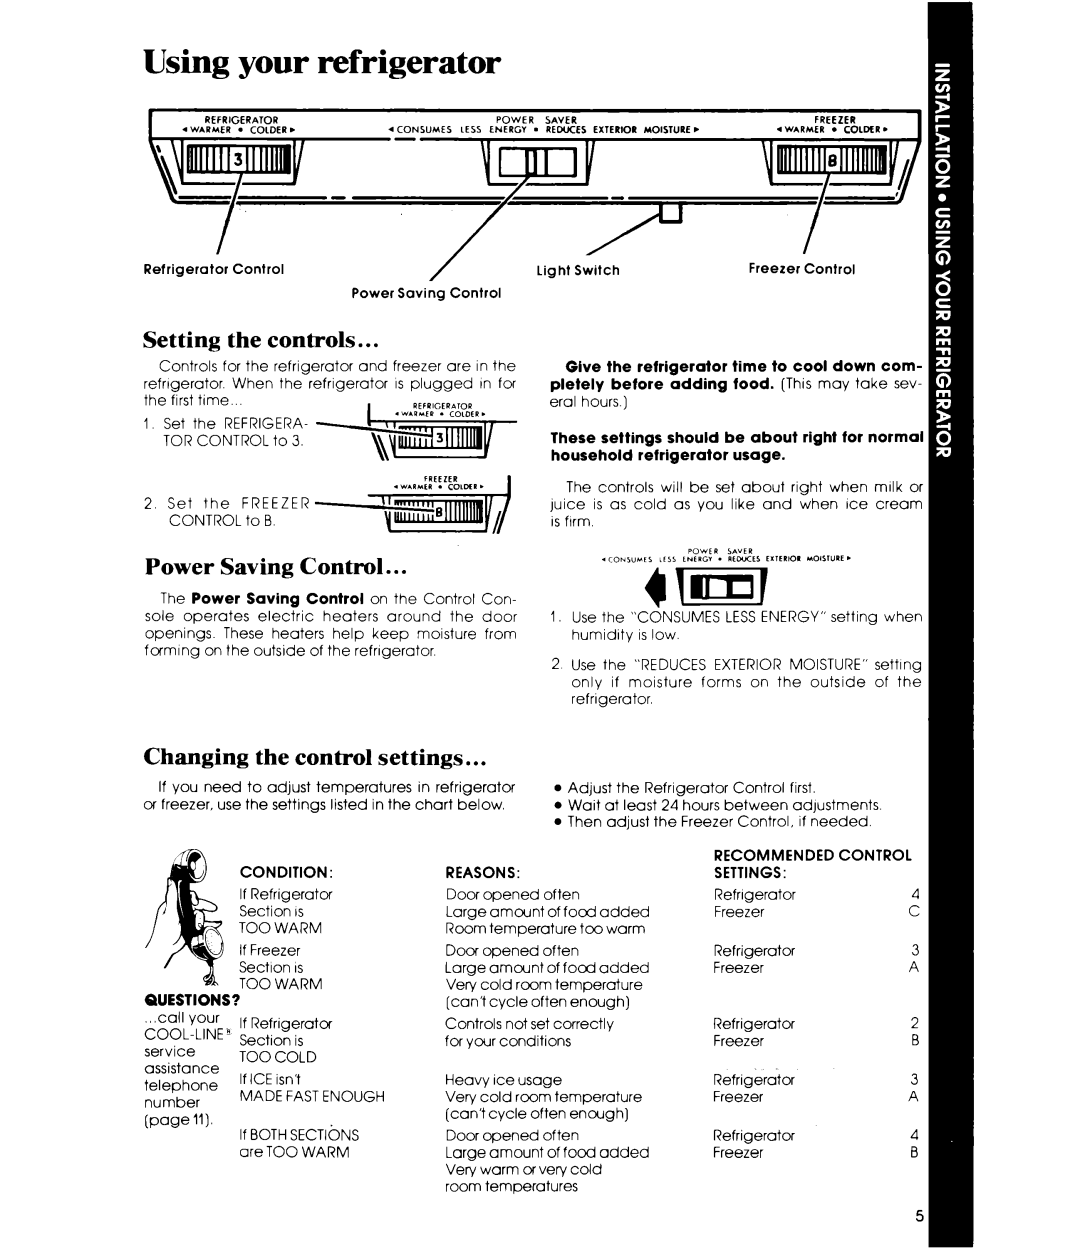 Whirlpool ETWM ws manual Using your refrigerator, Setting the controls, Power Saving Control, Changing the control settings 